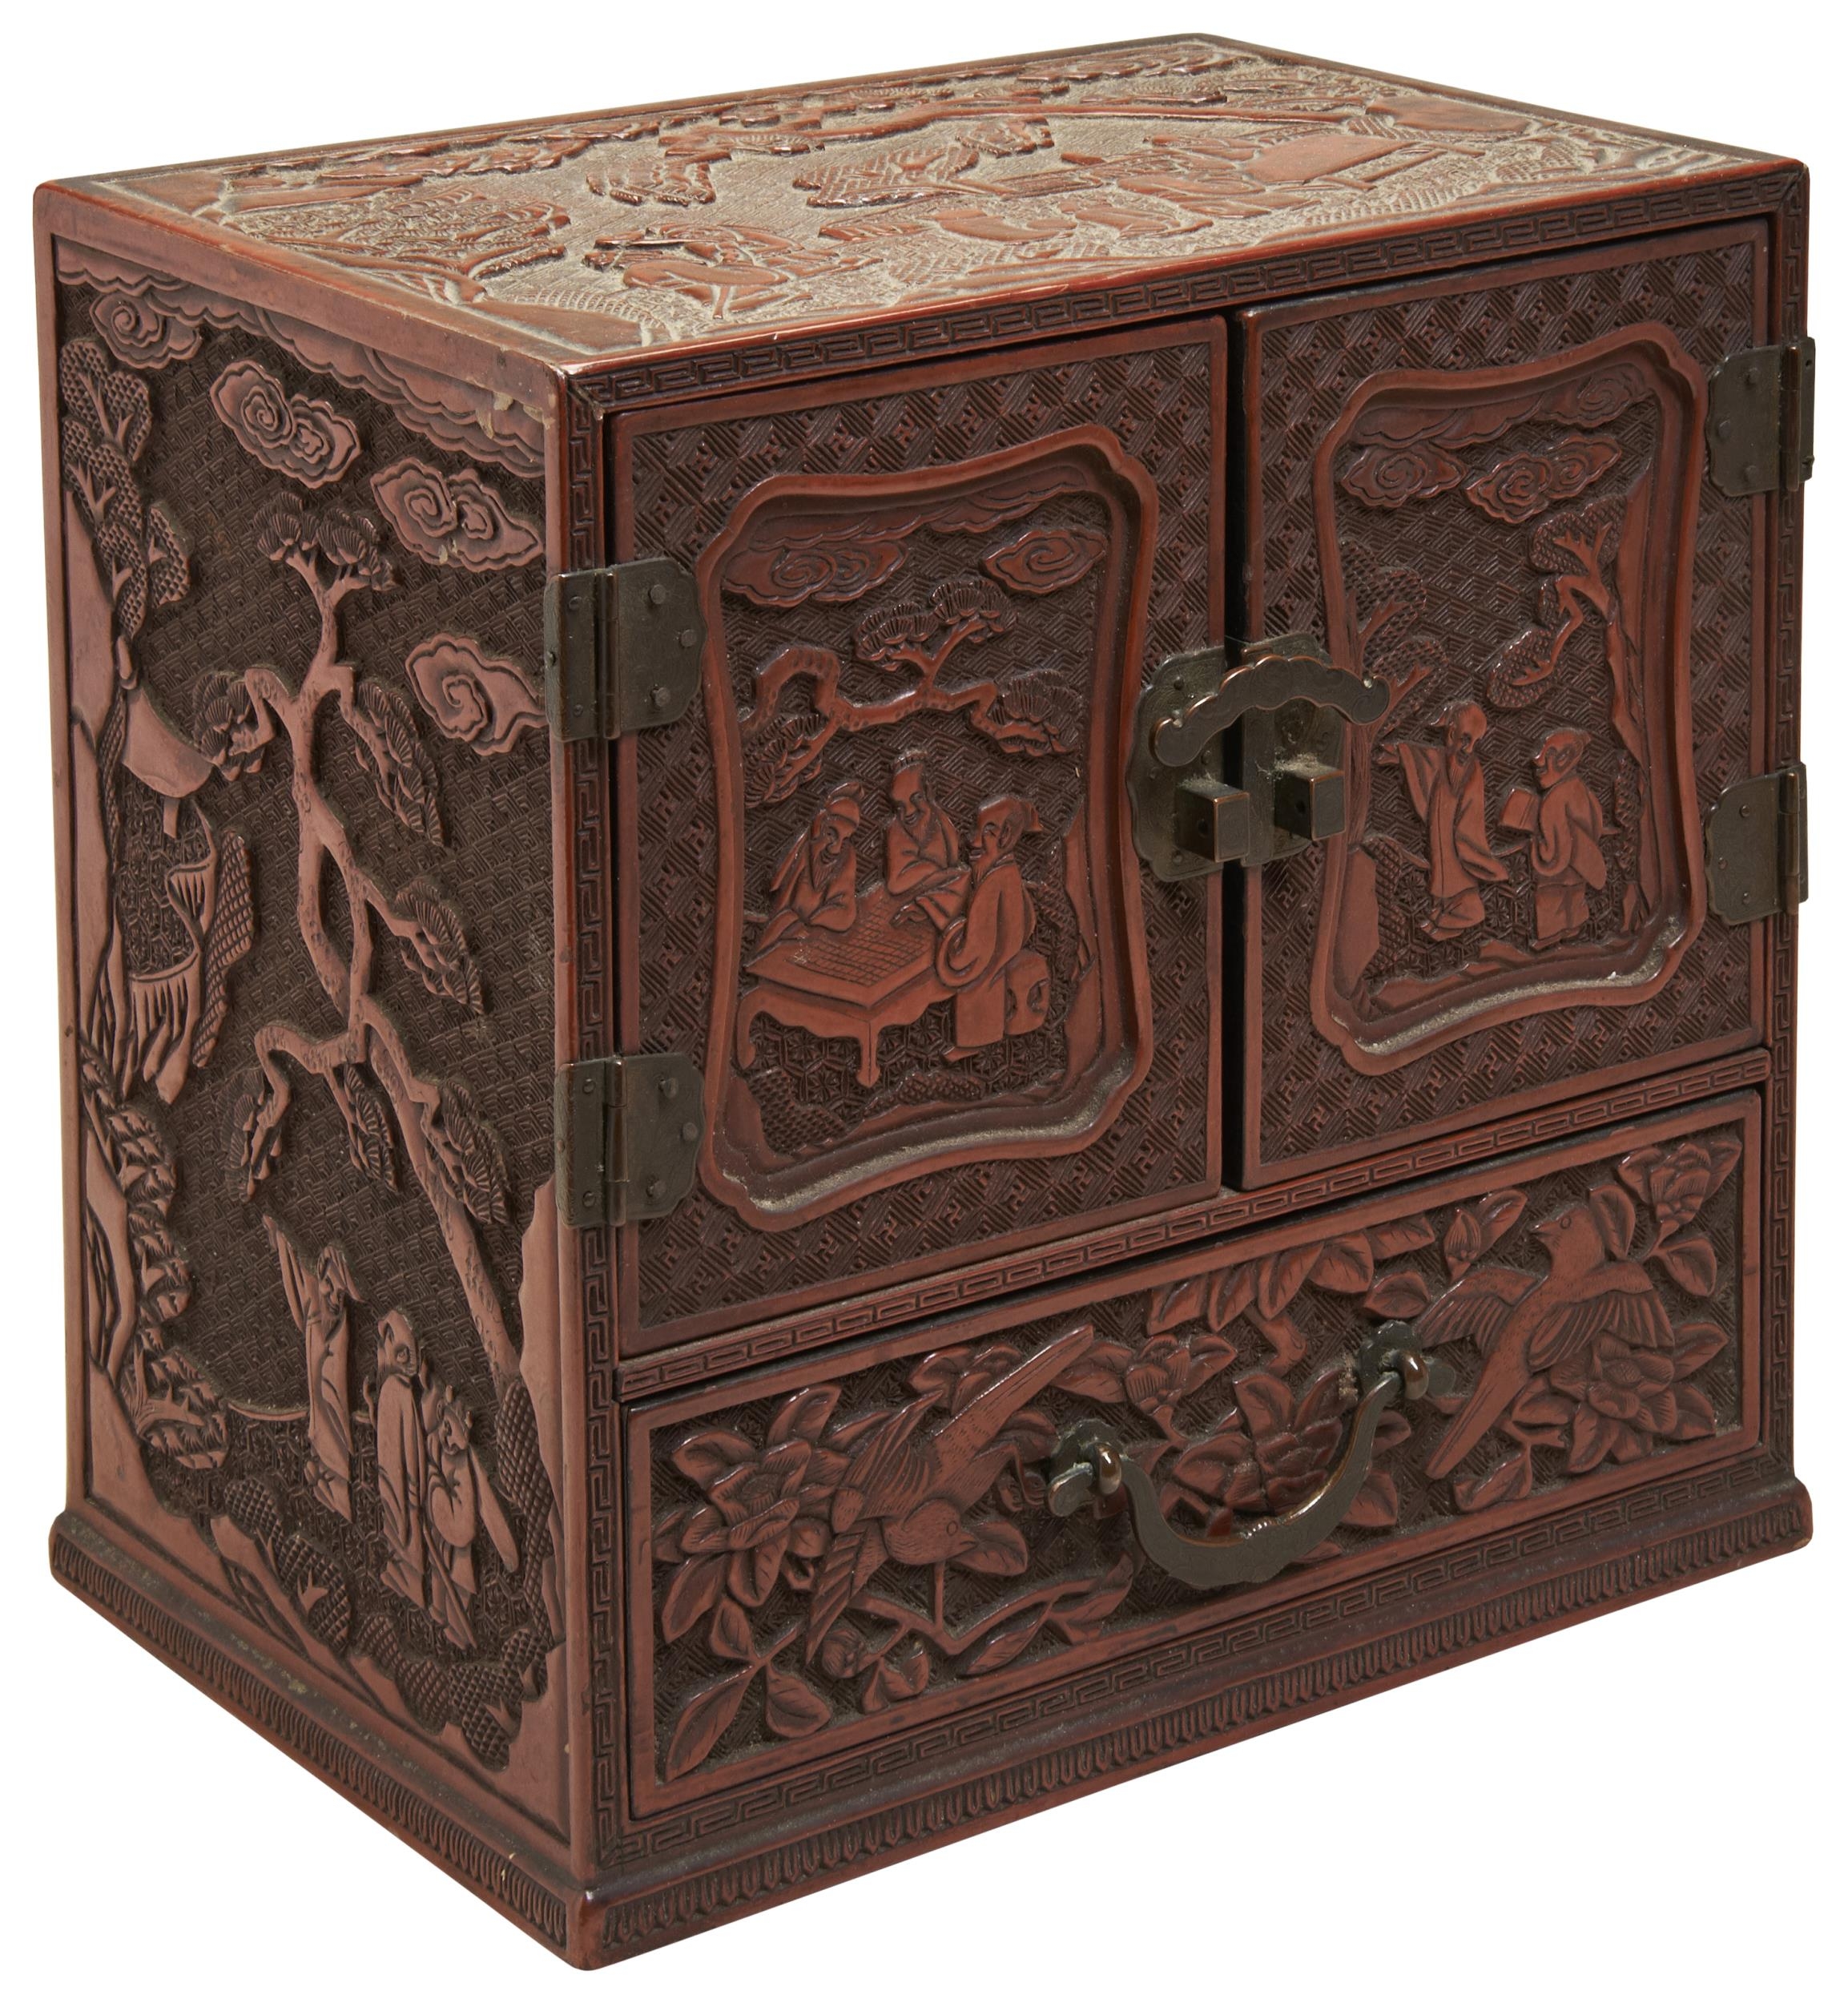 A CINNABAR LACQUER TABLE CABINET QING DYNASTY, 19TH CENTURY the exterior carved with lotus blossoms,